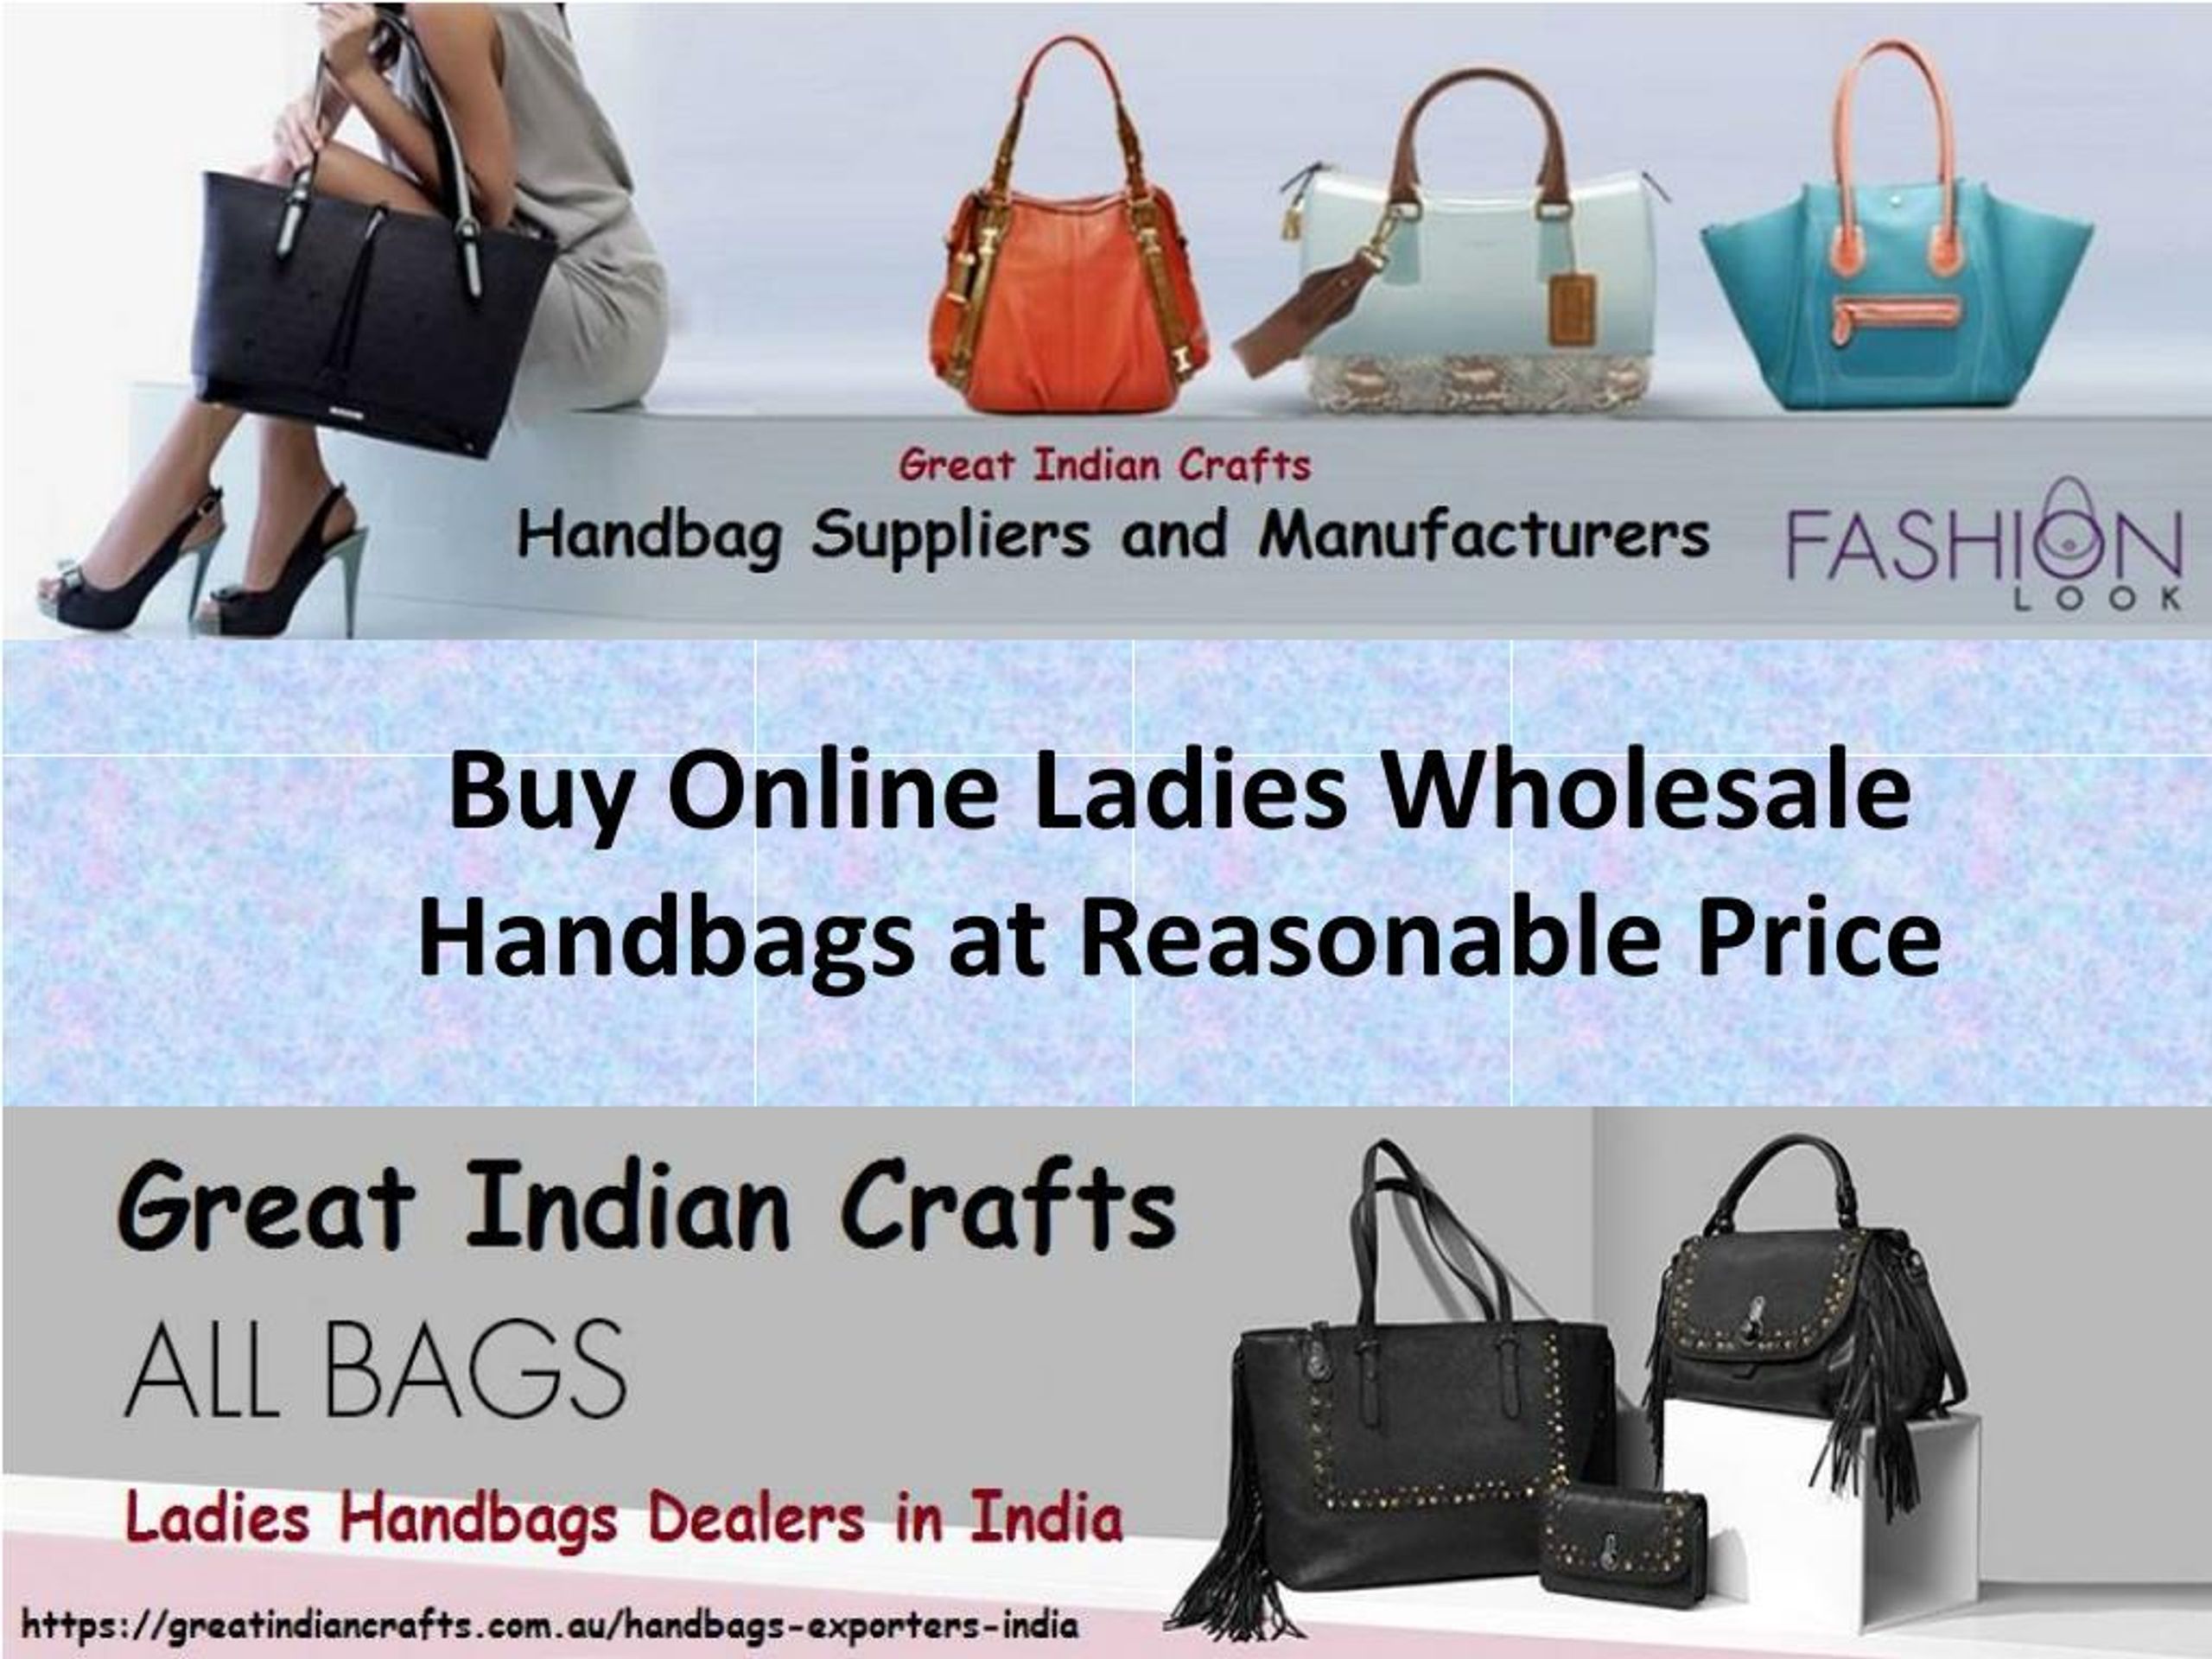 8 Type of Bags Every Woman Should Absolutely Own - Rediff.com